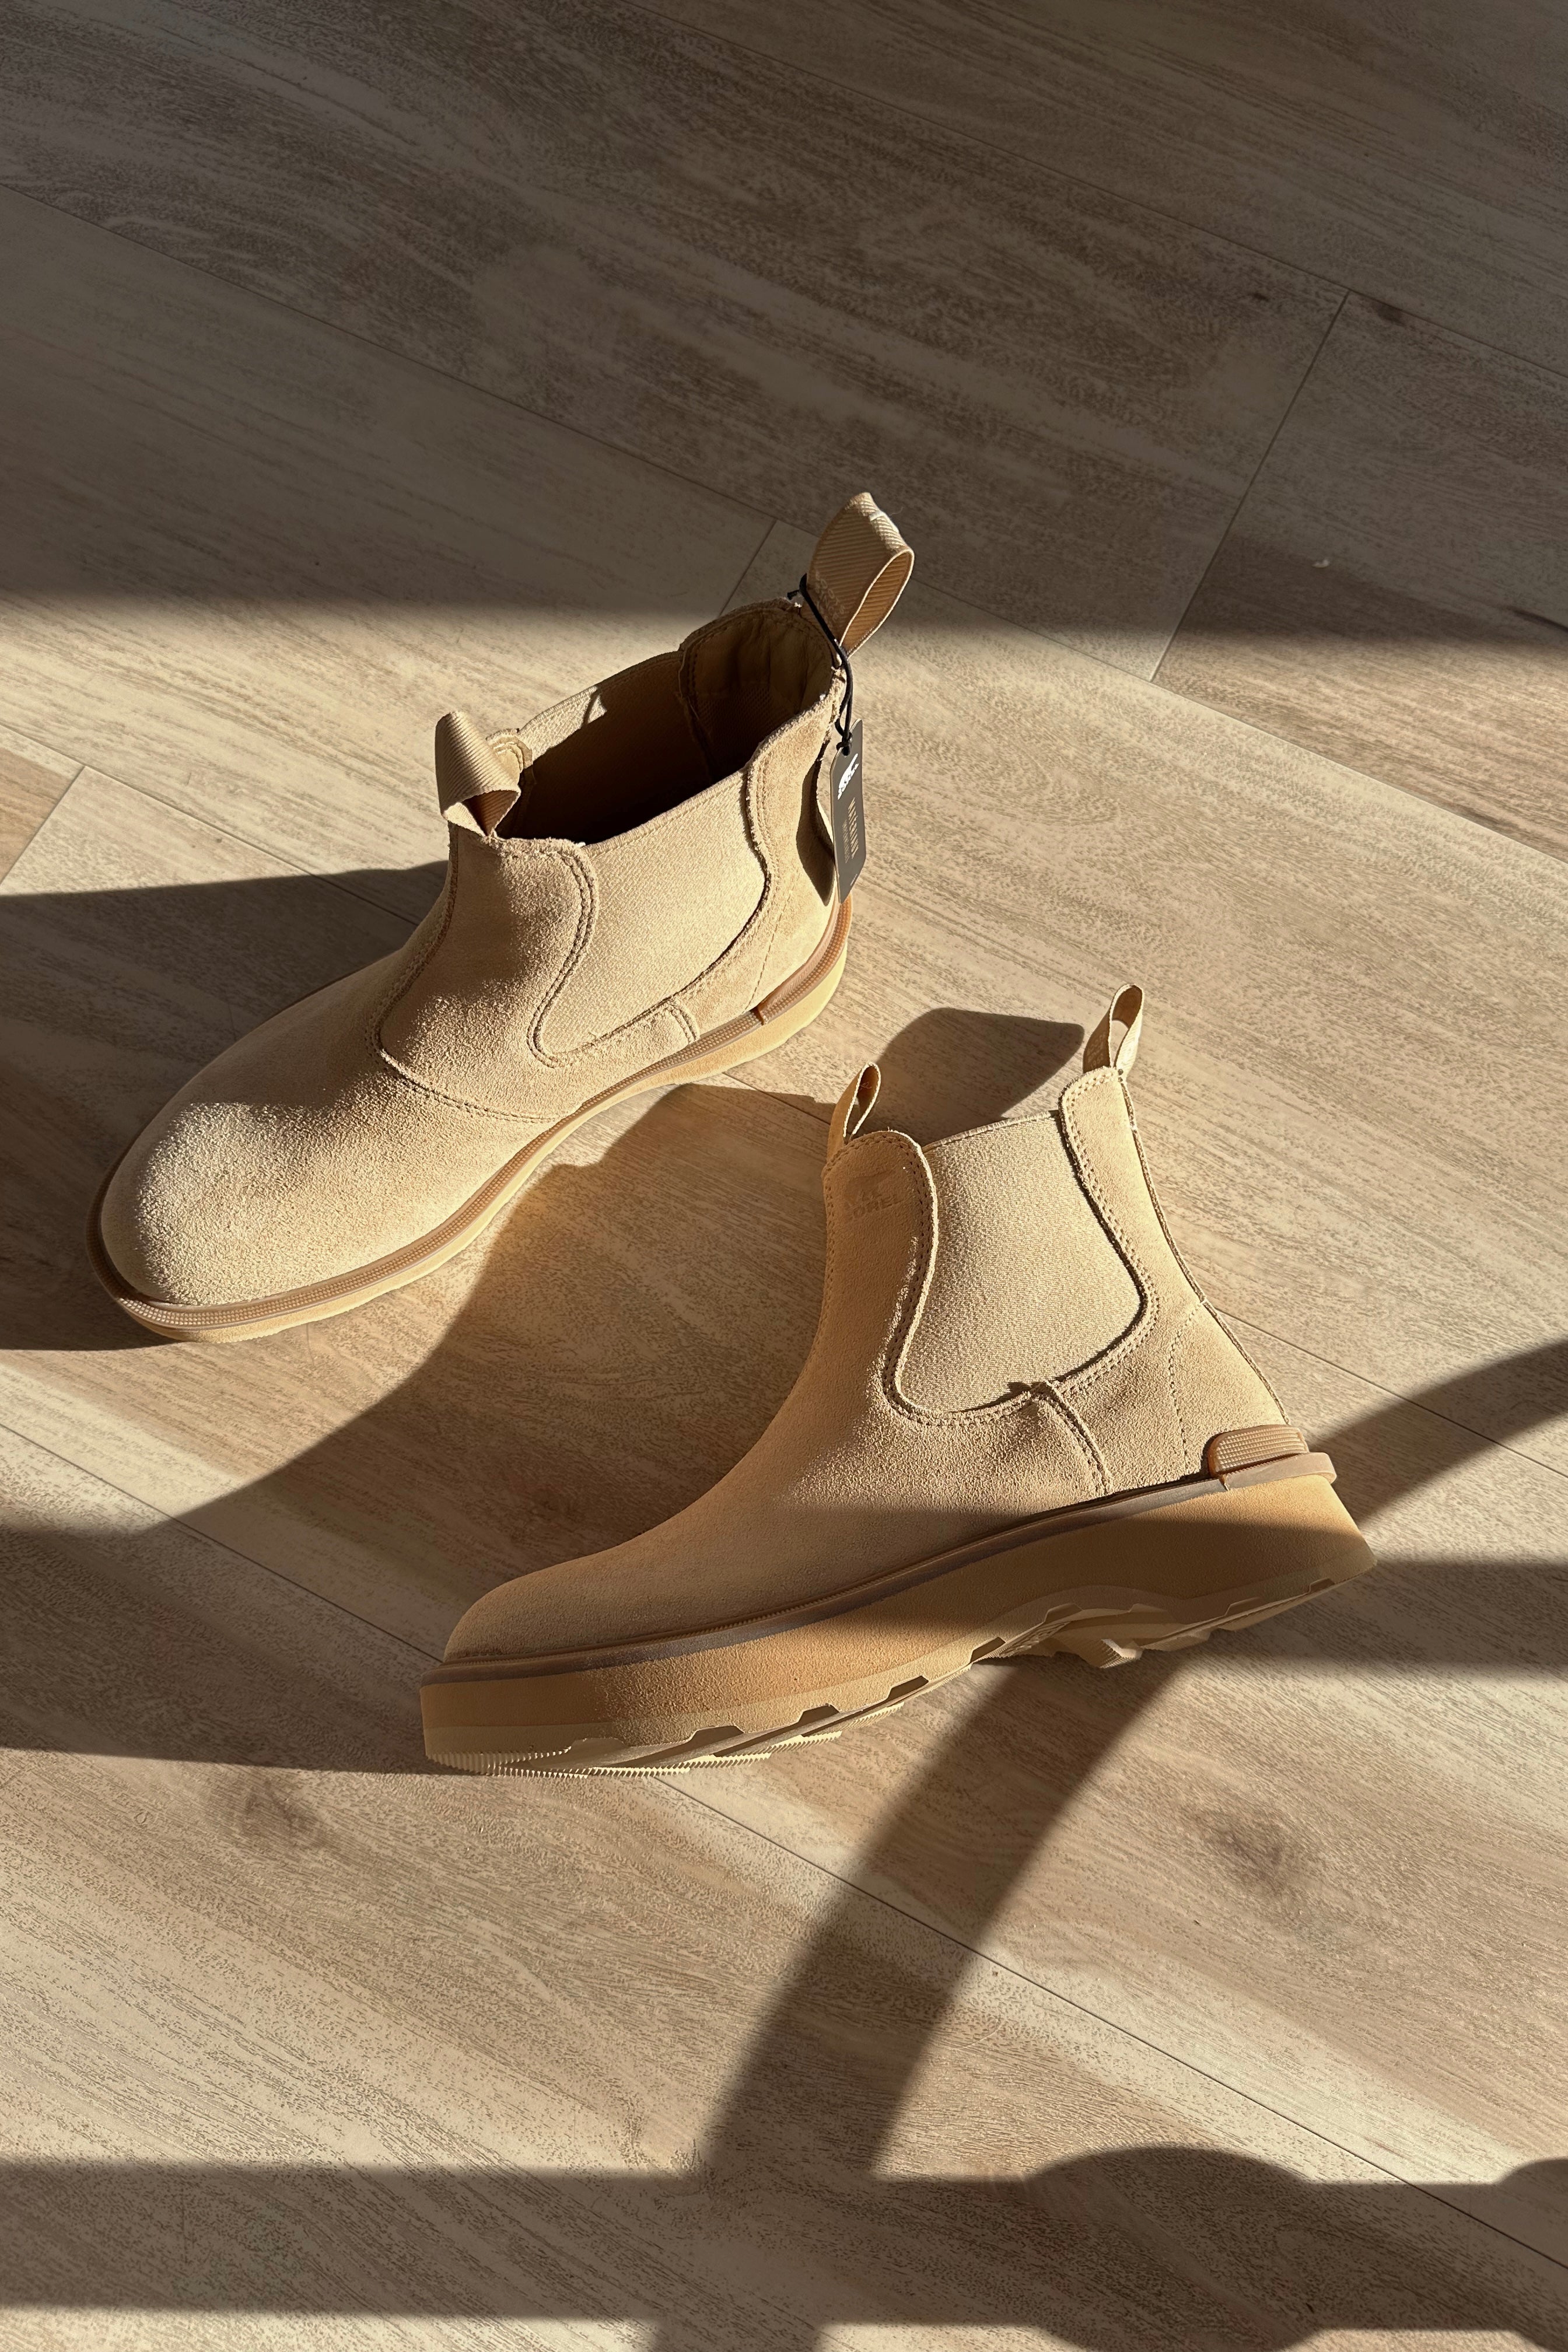 Ariel view of the Hi-Line Chelsea Boot in Canoe Ceramic which features tan waterproof suede, monochrome lightweight sole, stretch panels on each side, pull tabs, round toe, 1 inch platform height and 1 inch heel height